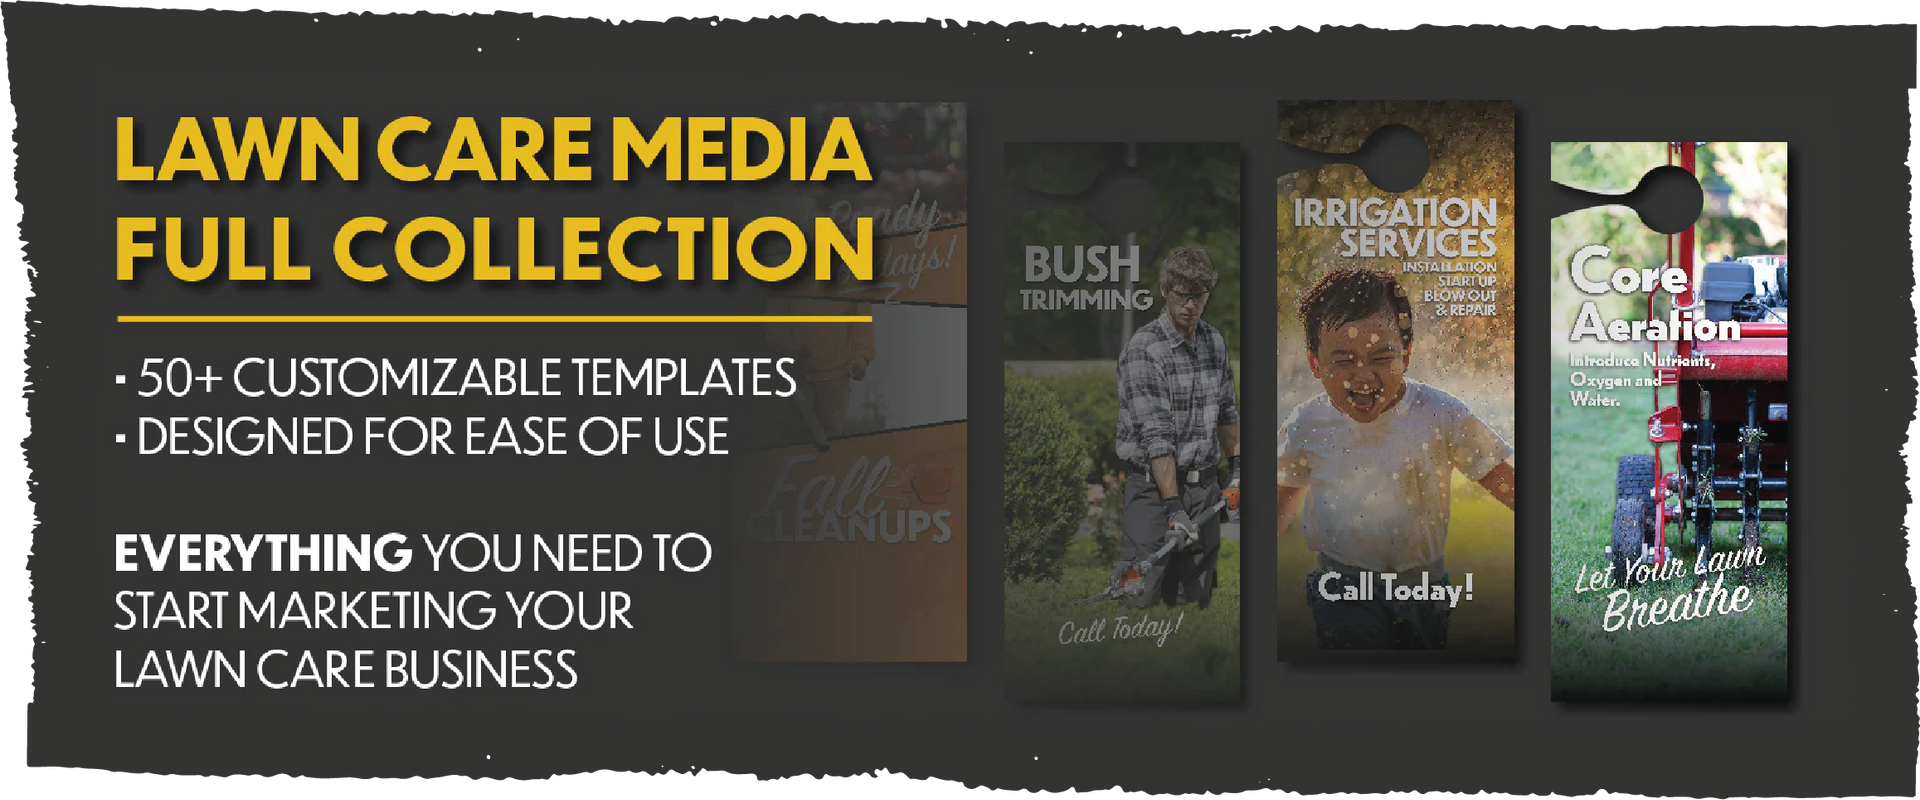 a full collection of lawn care media templates